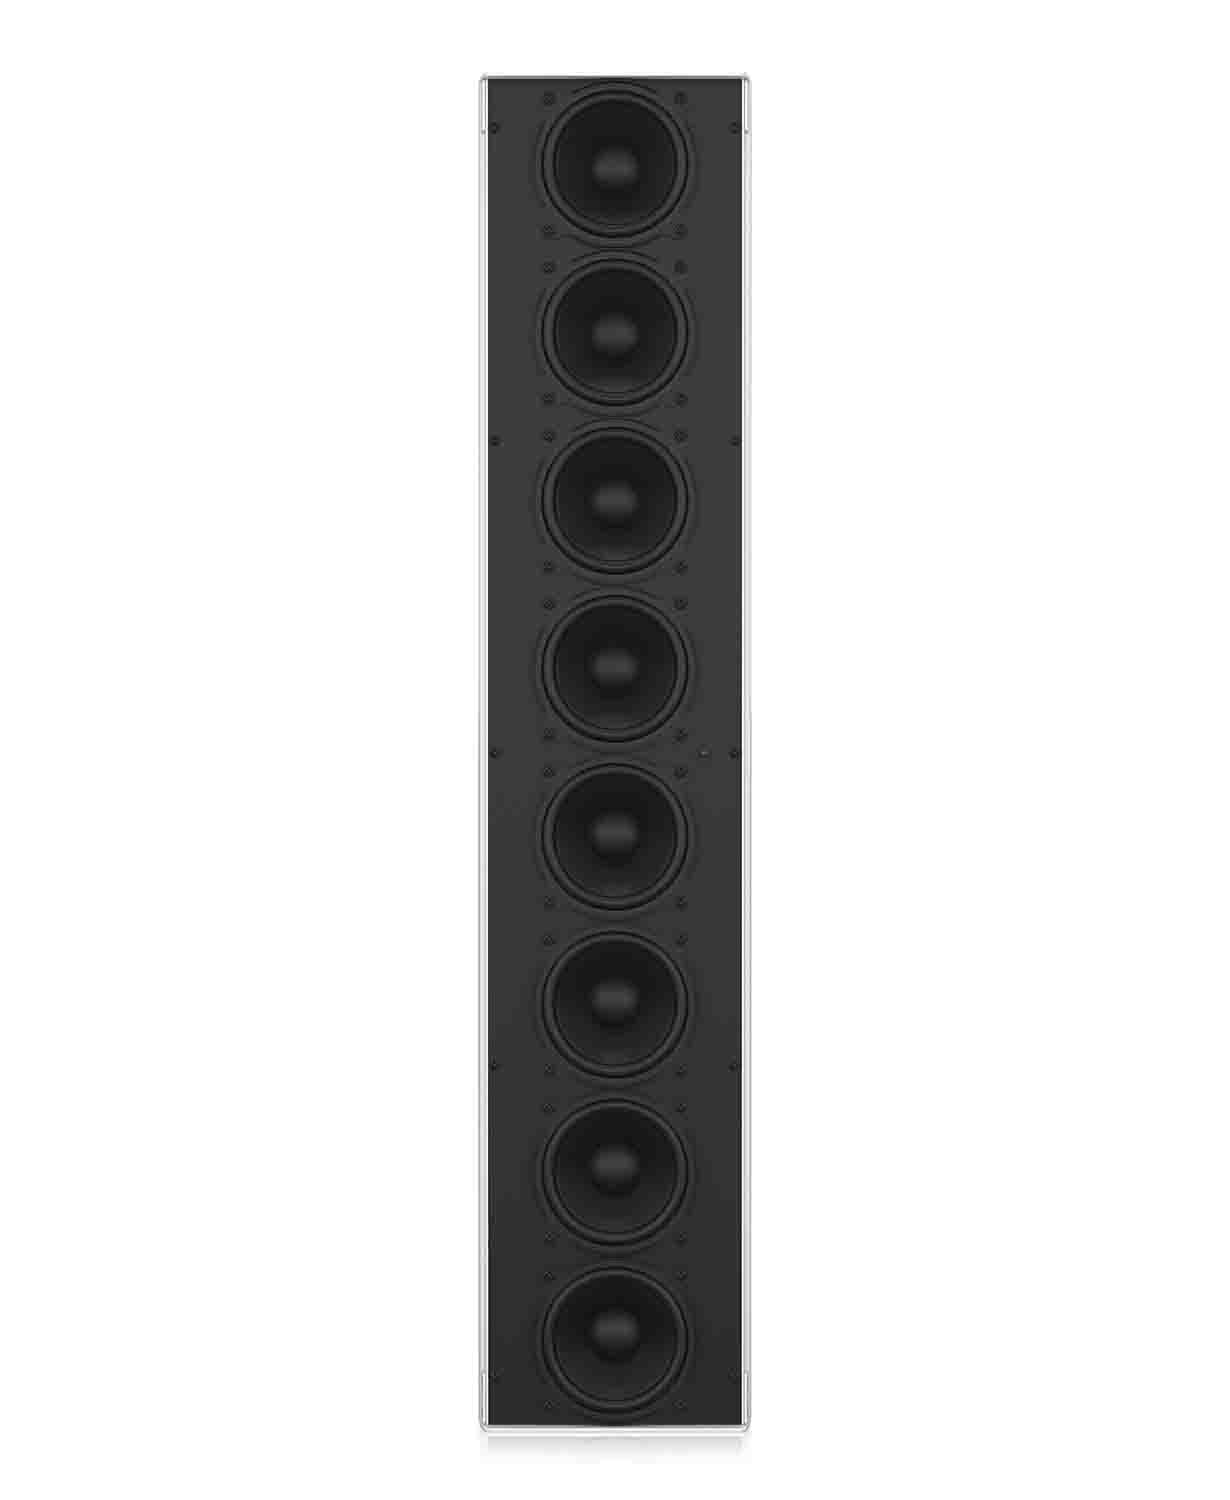 Tannoy QFLEX 8 Digitally Steerable Powered Column Array Loudspeaker with 8 Independently Controlled Drivers - Hollywood DJ